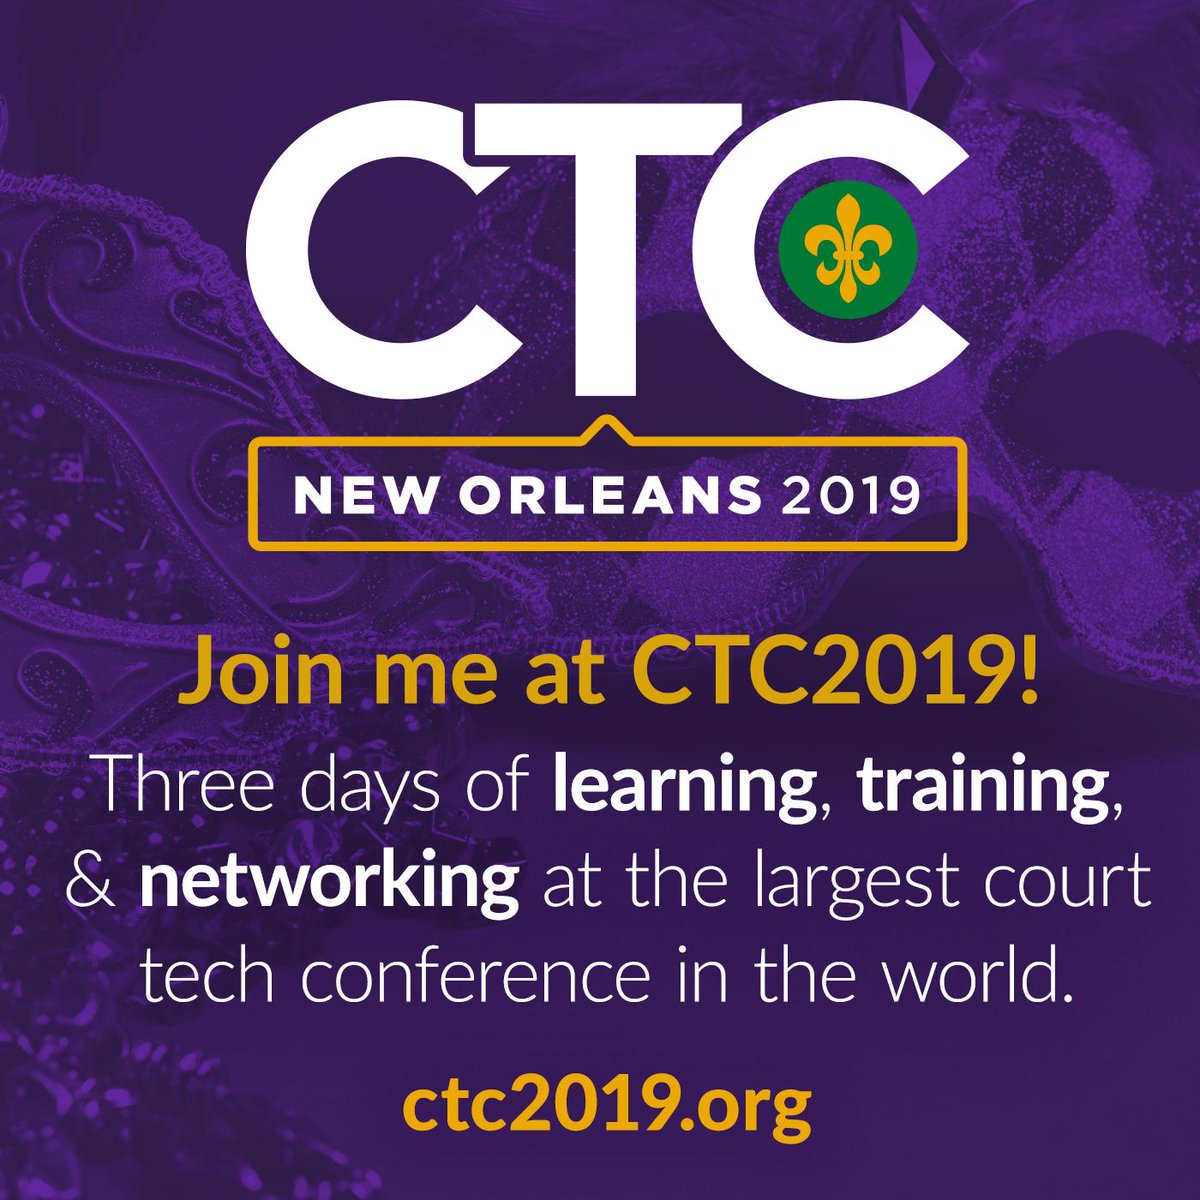 Don’t forget to register for our session this year at #CTC2019! 

#mvixevents #mvixgetscourted #docketdisplays #court #techforcourts #accesstojustice 

>> events.mvixdigitalsignage.com/court-technolo…